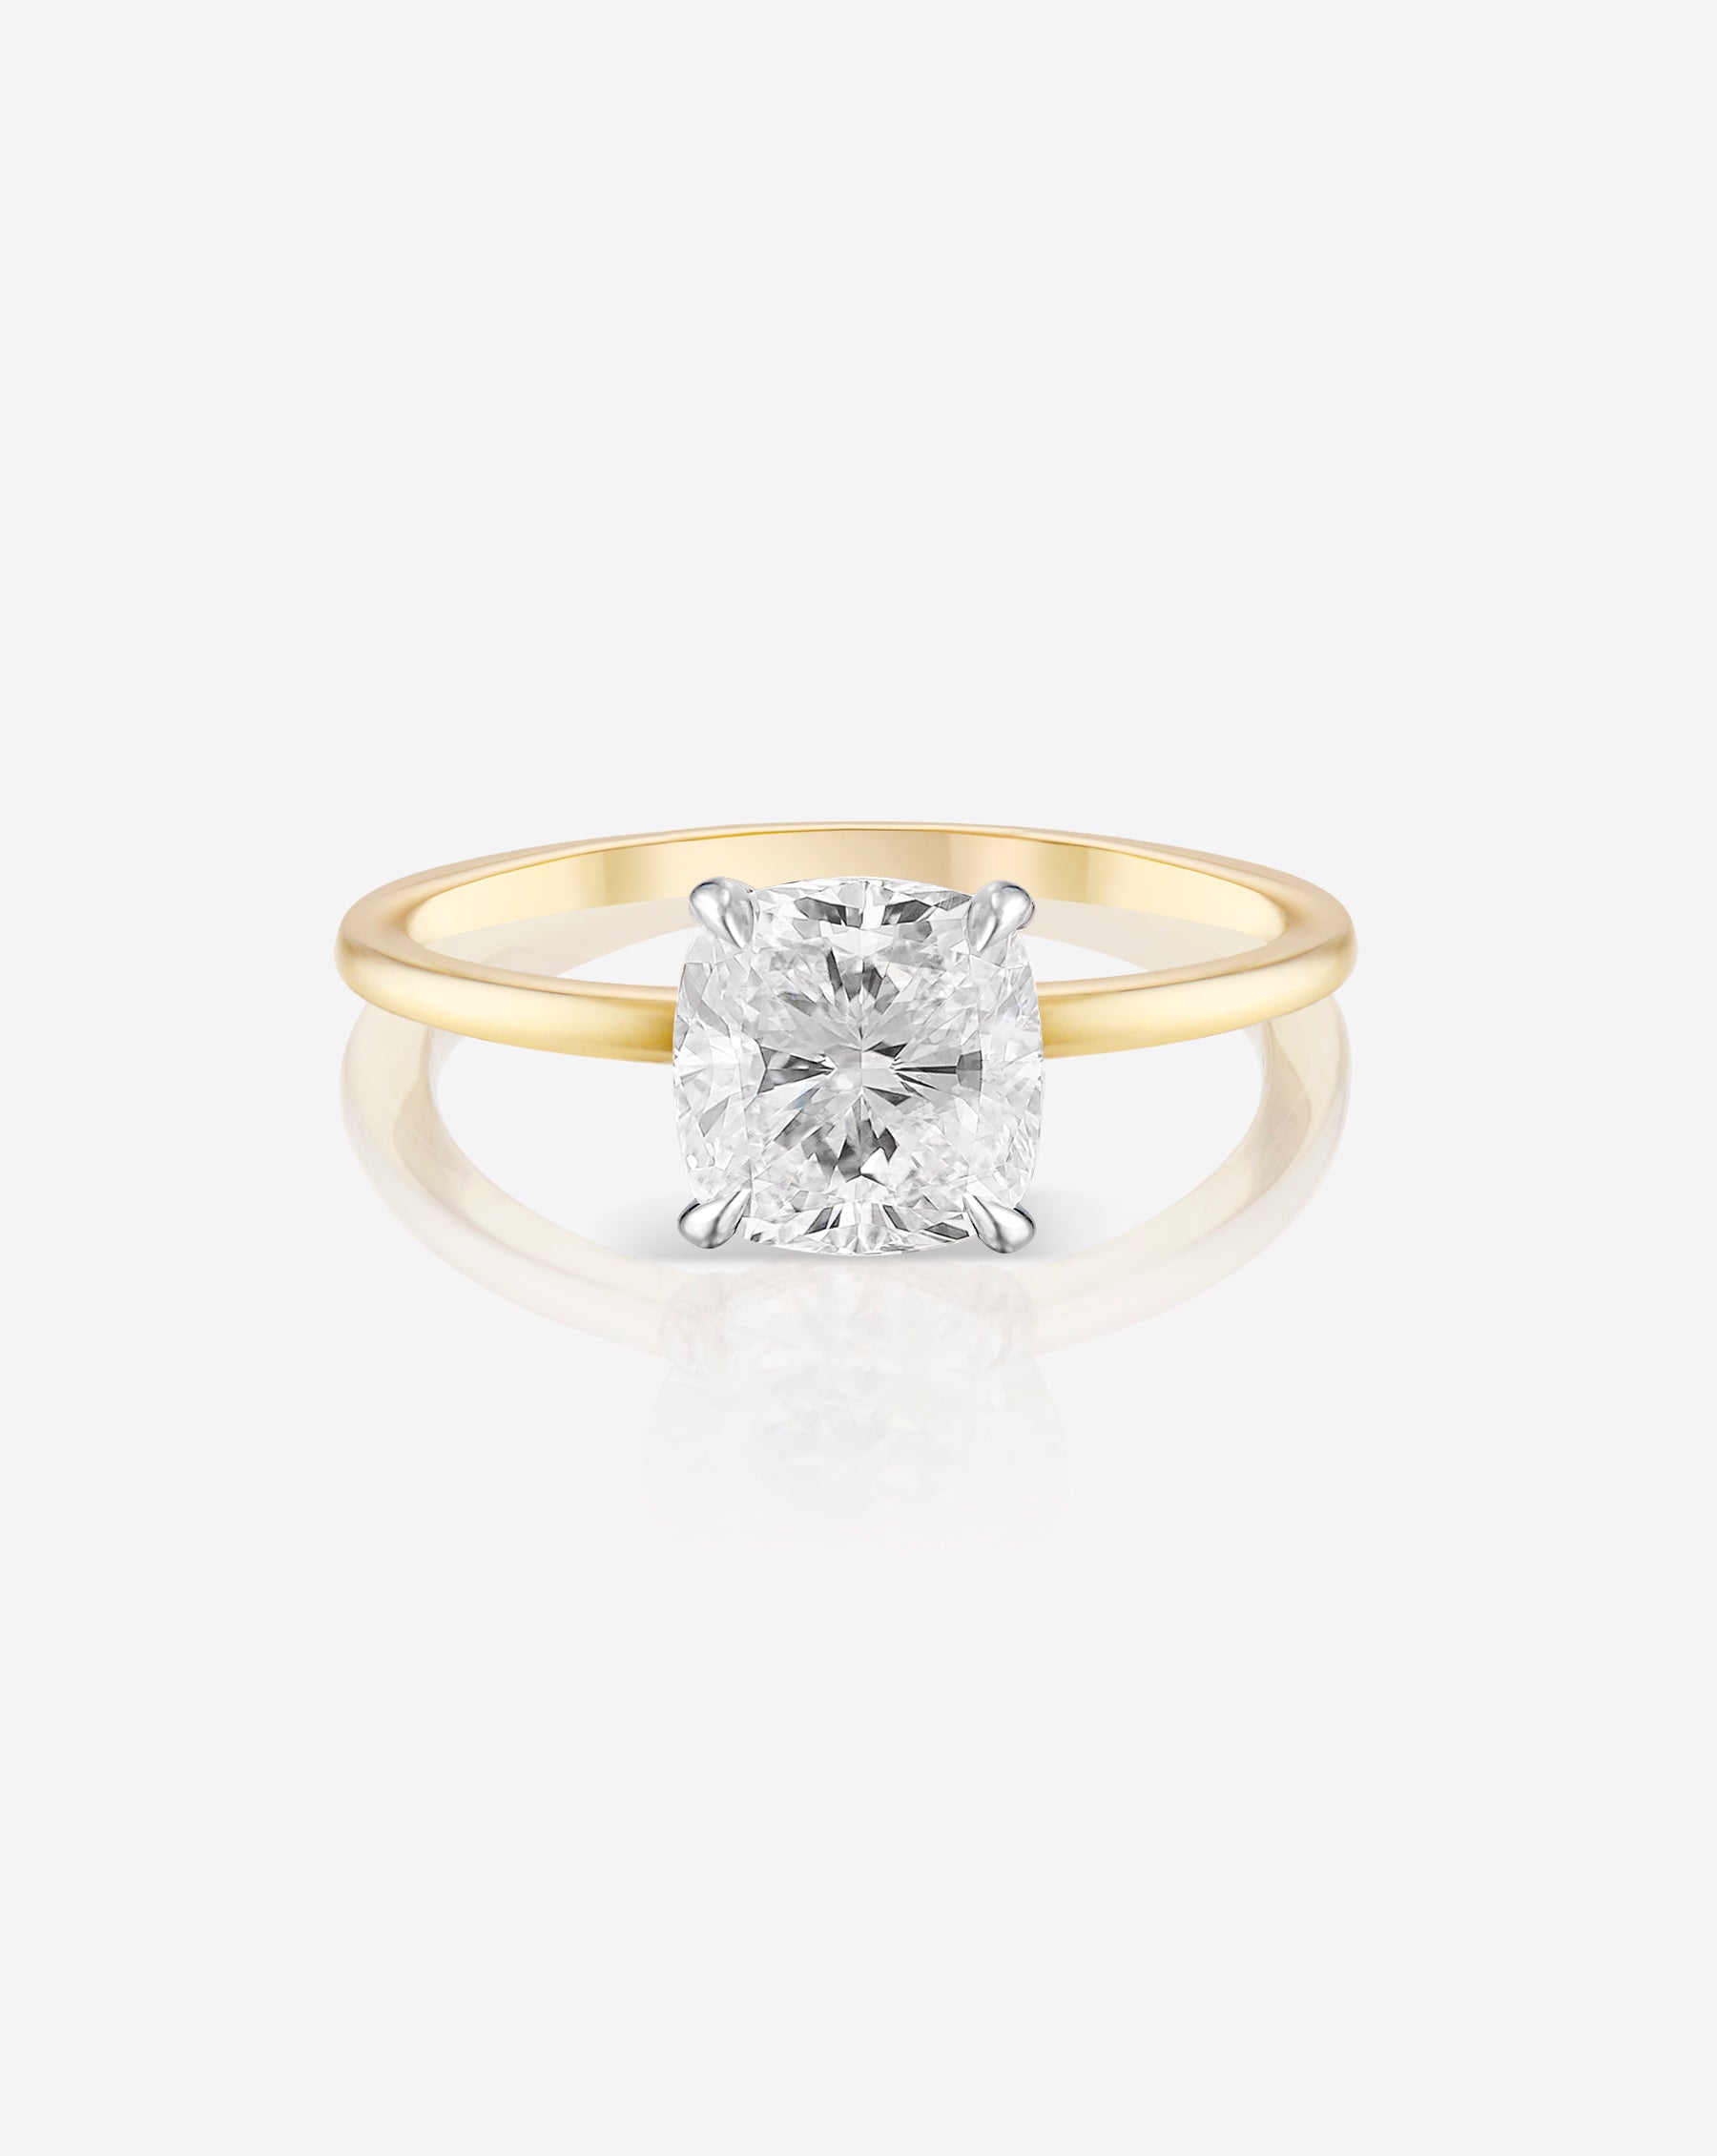 1.57 Cushion in the Whisper Thin® Natural Diamond Ring 14K Yellow Gold with Platinum Prongs